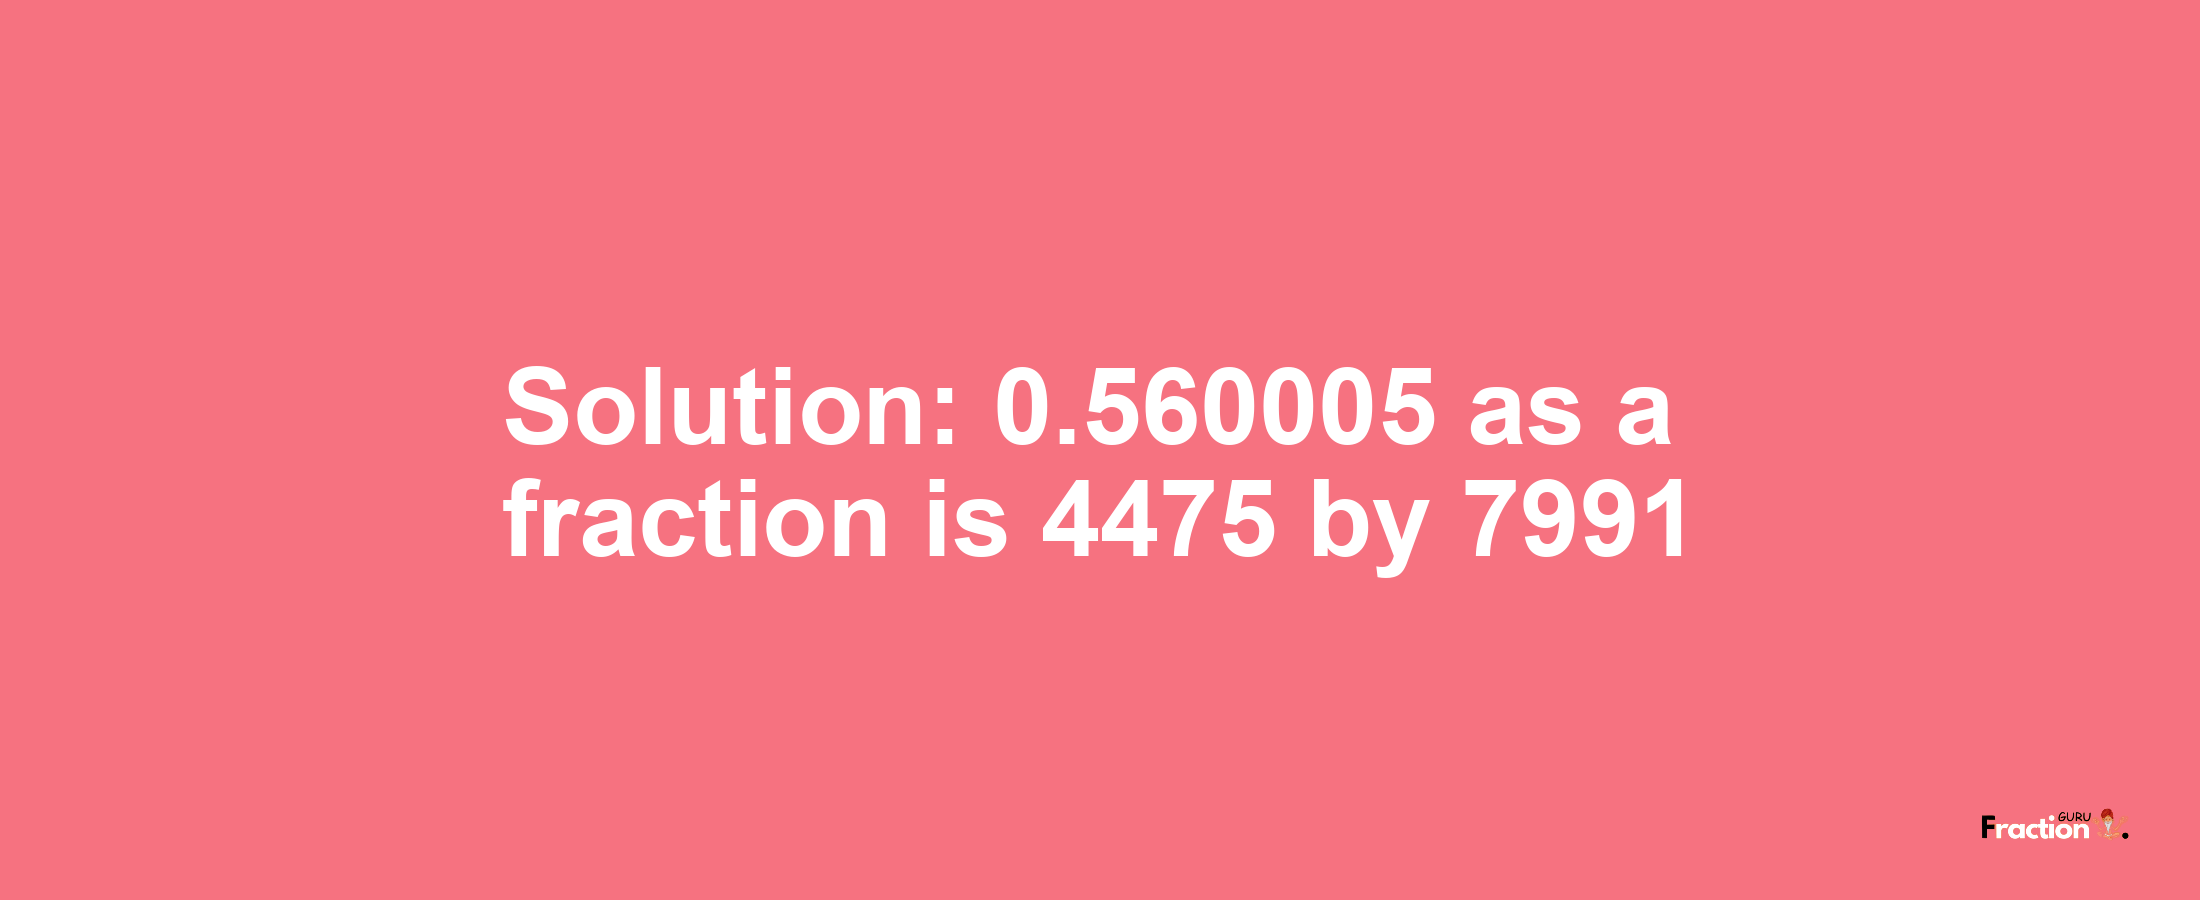 Solution:0.560005 as a fraction is 4475/7991